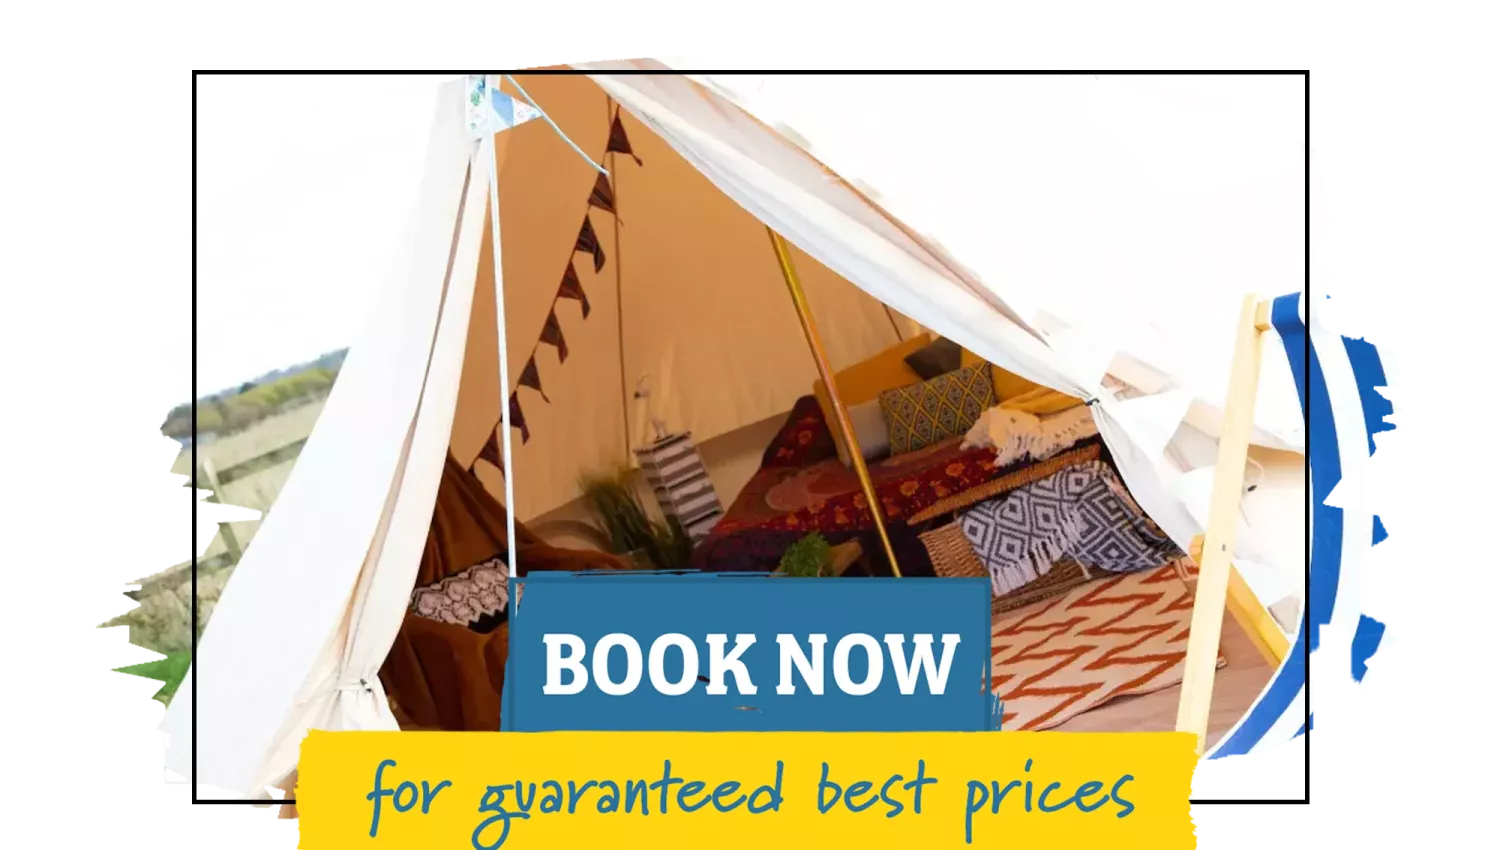 a furnished bell tent for glamping